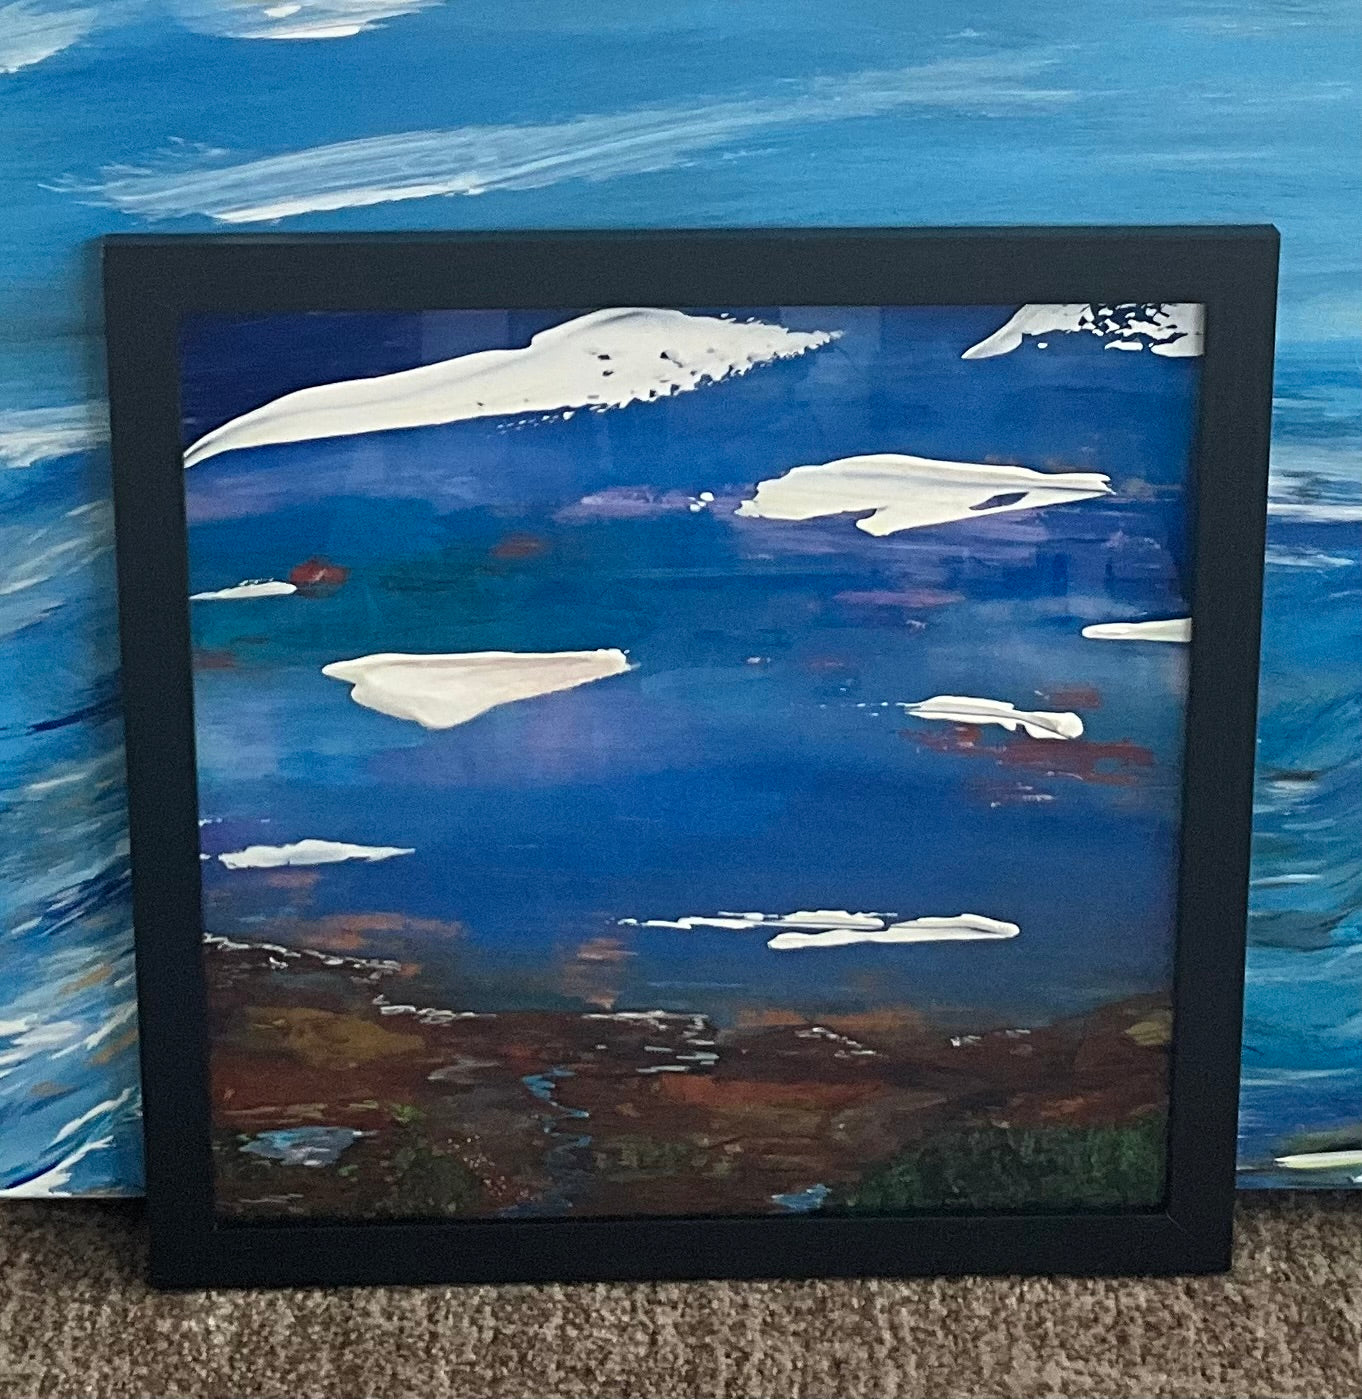 “Our Sky Valley” - 13”x13” Stacked Glass 3D Acrylic Painting. Framed.